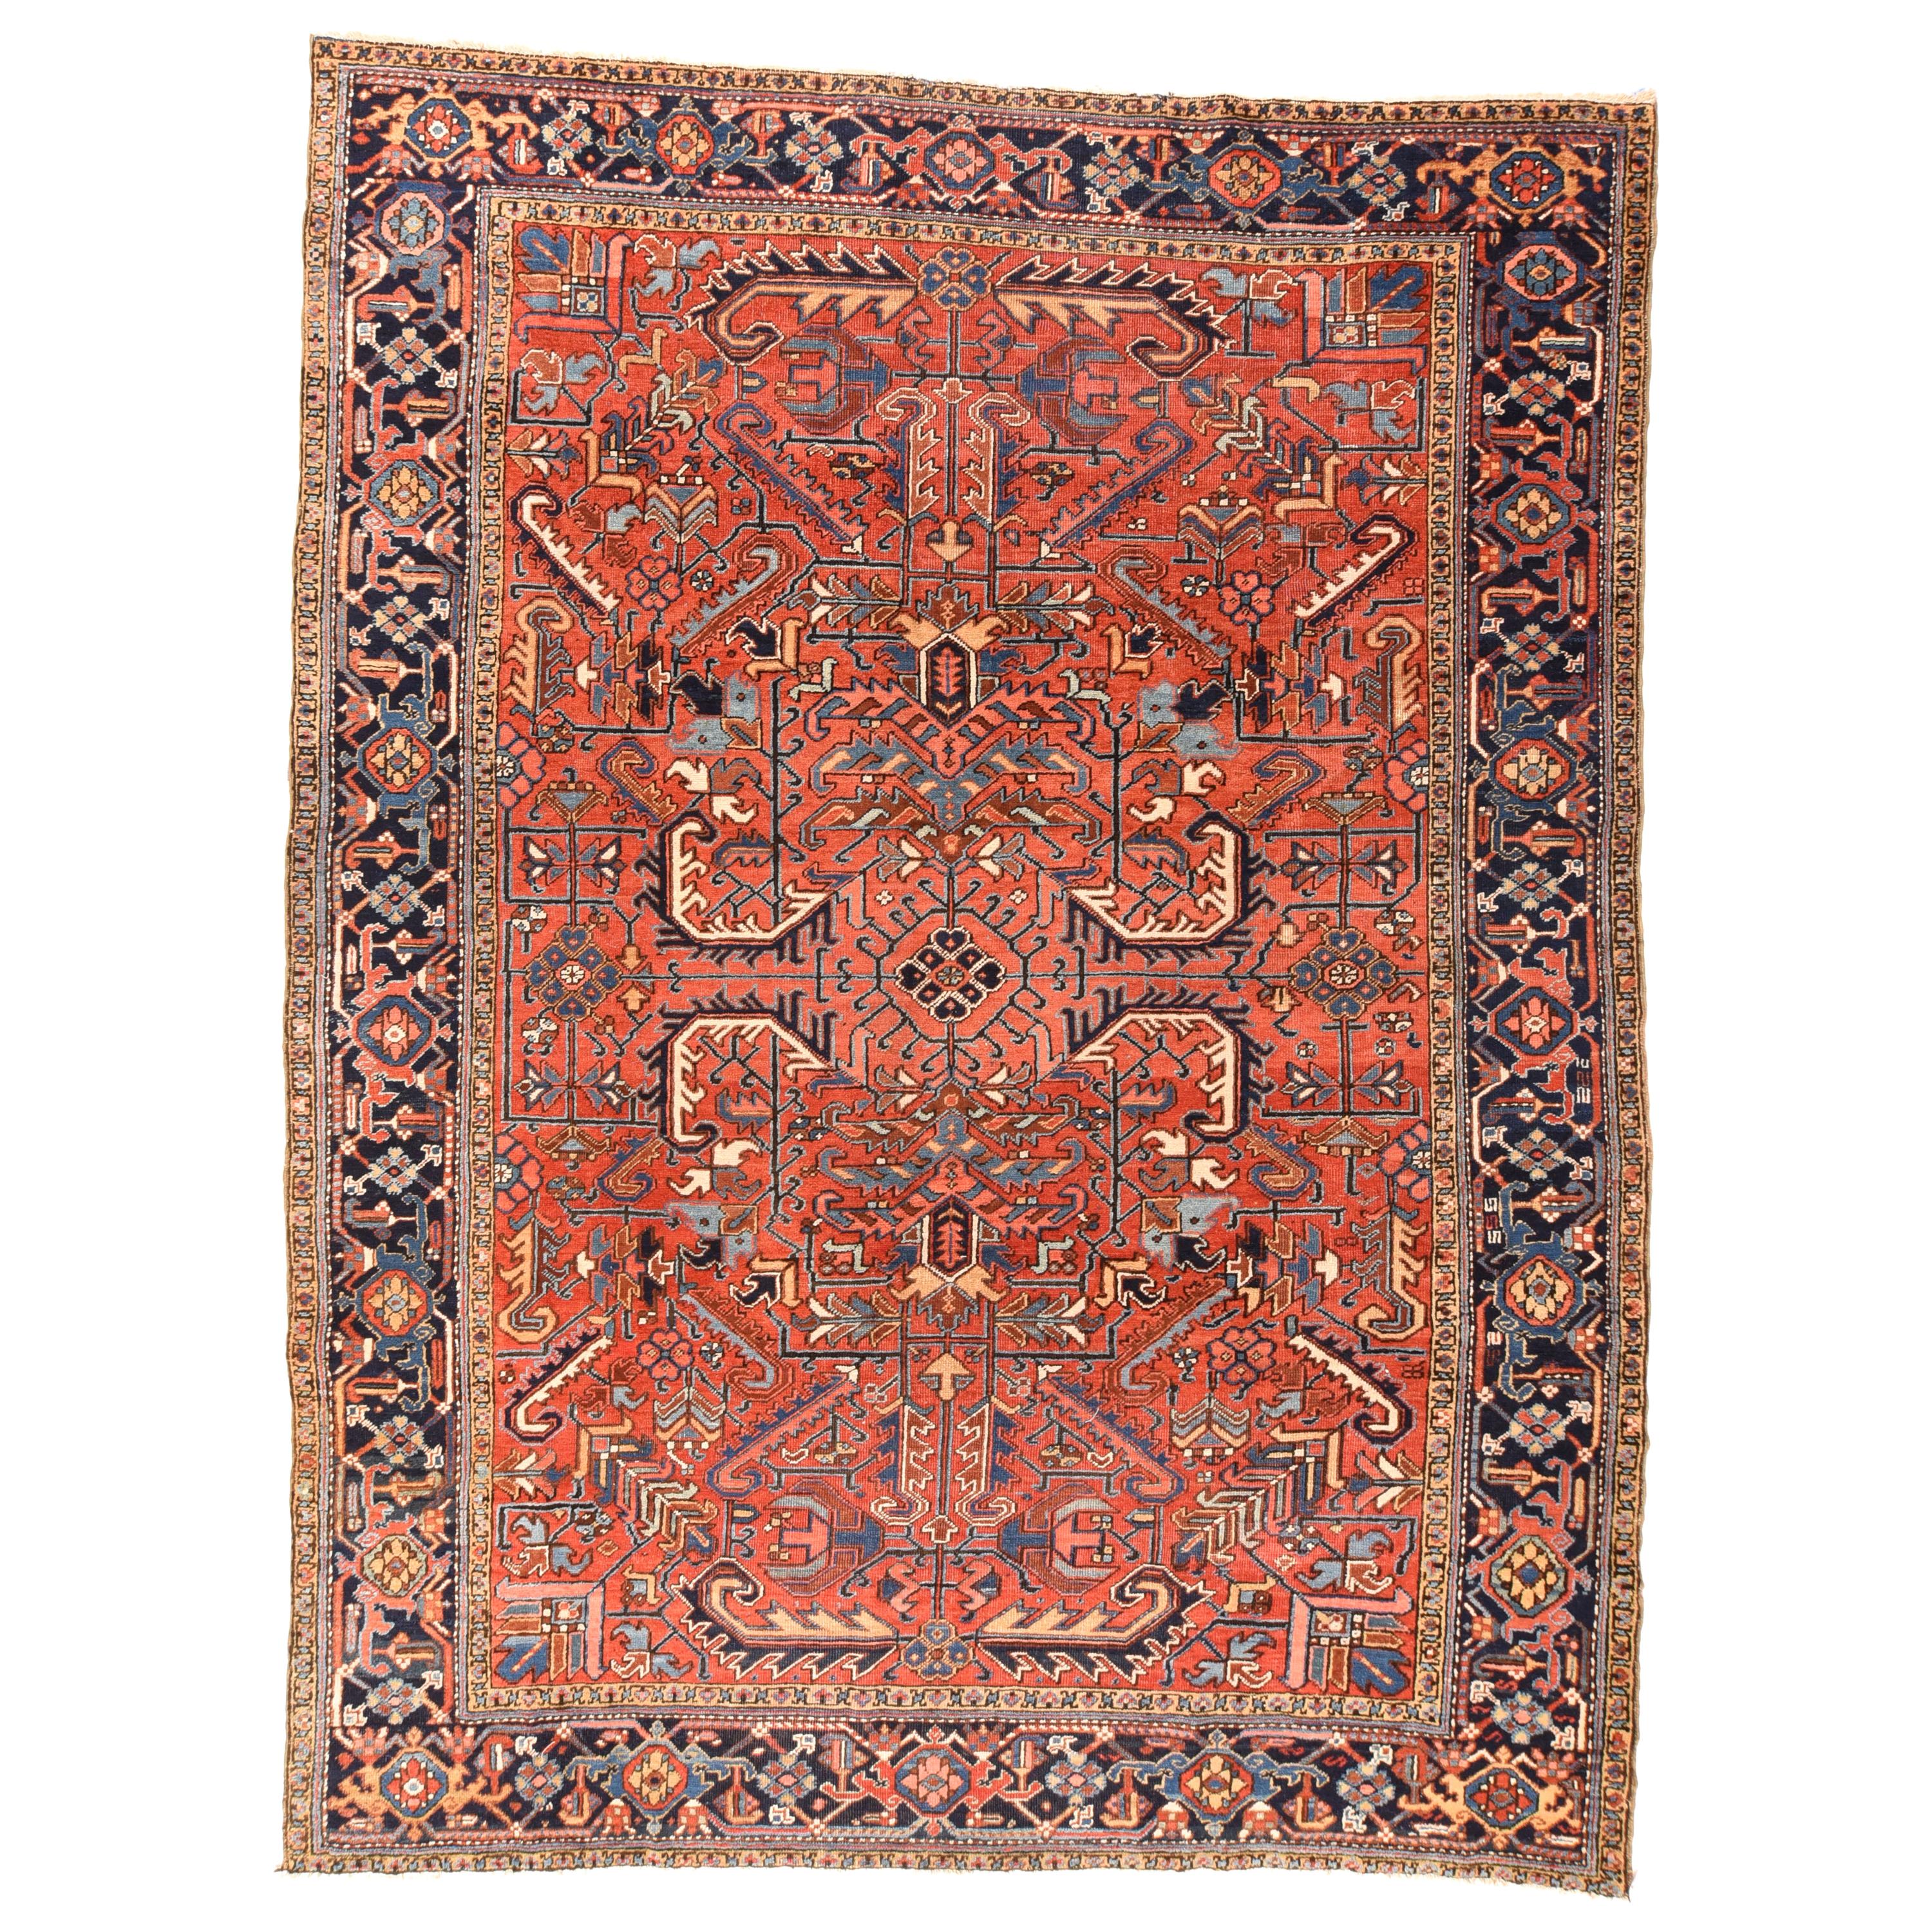 Vintage Persian Heriz Area Rug, Hand Knotted, circa 1900